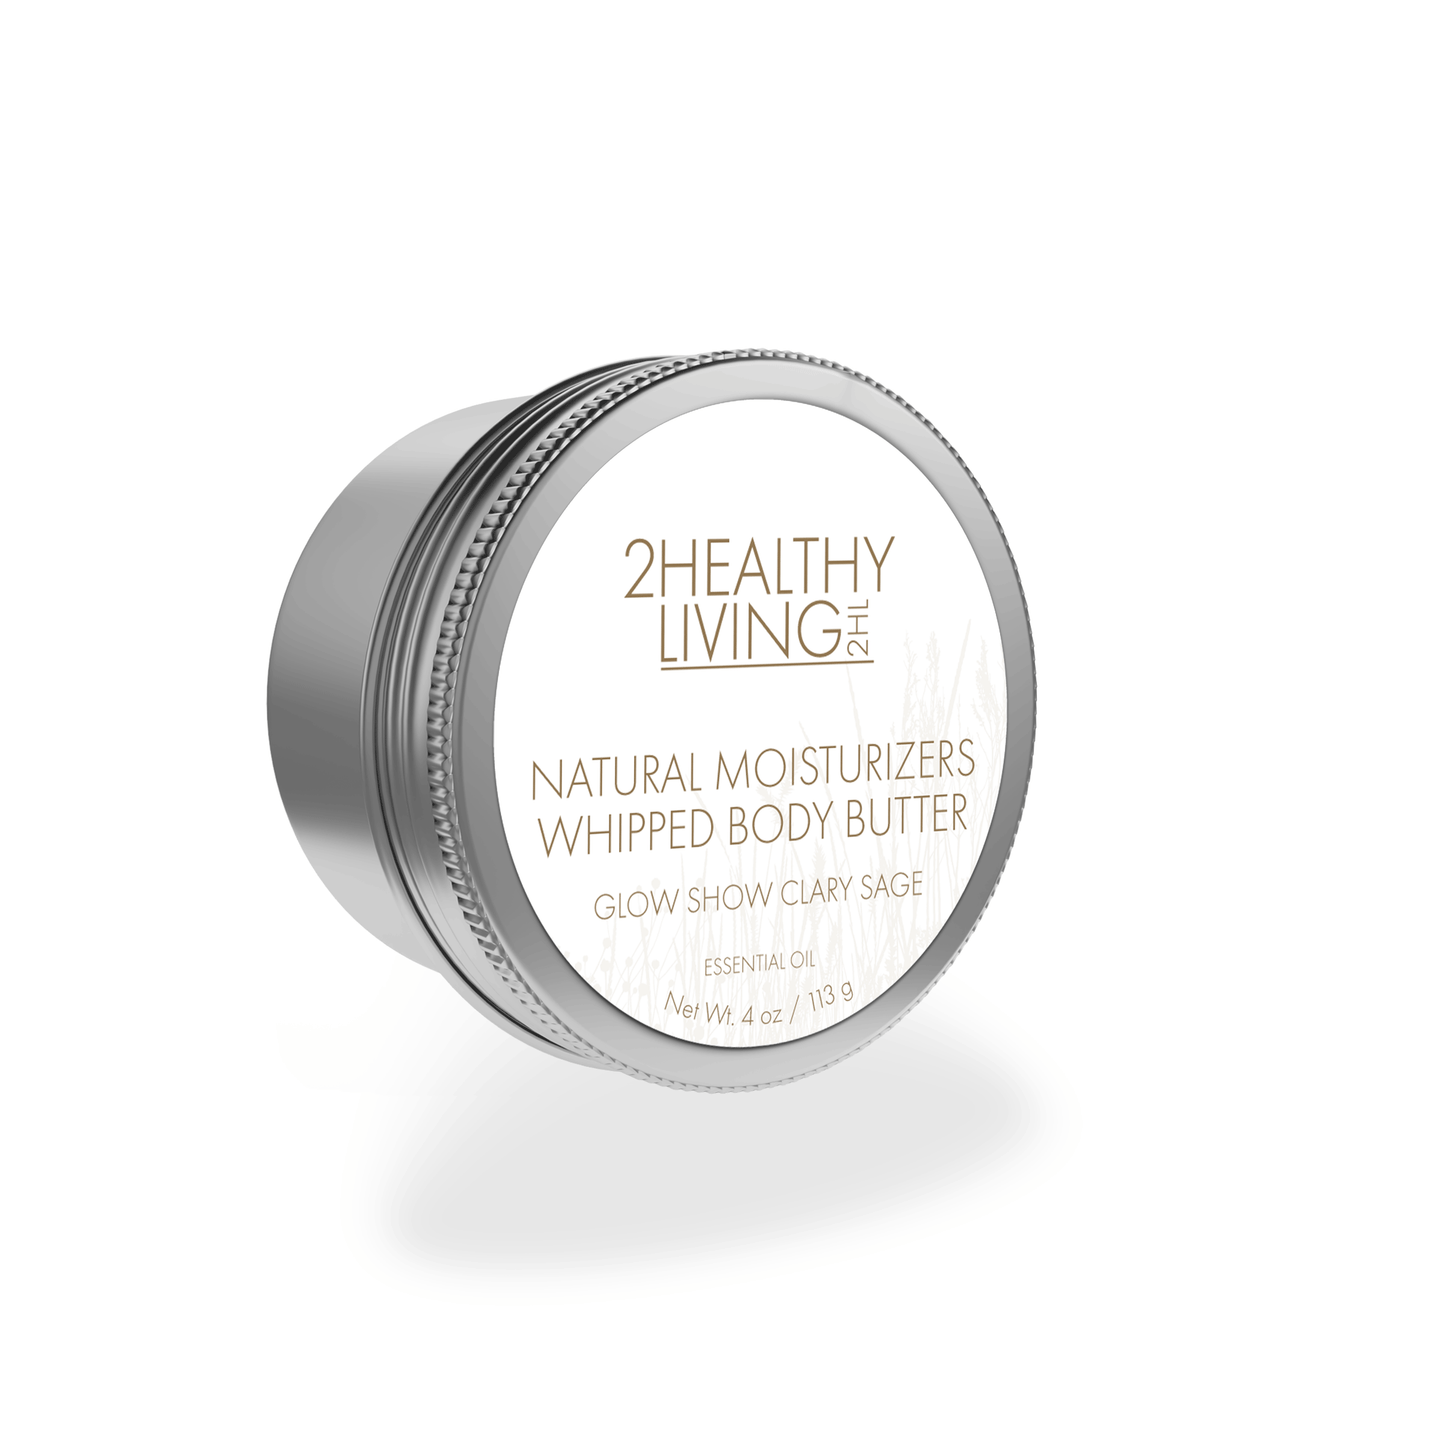 Glow Show Clary Sage Natural Moisturizers Whipped Body Butter